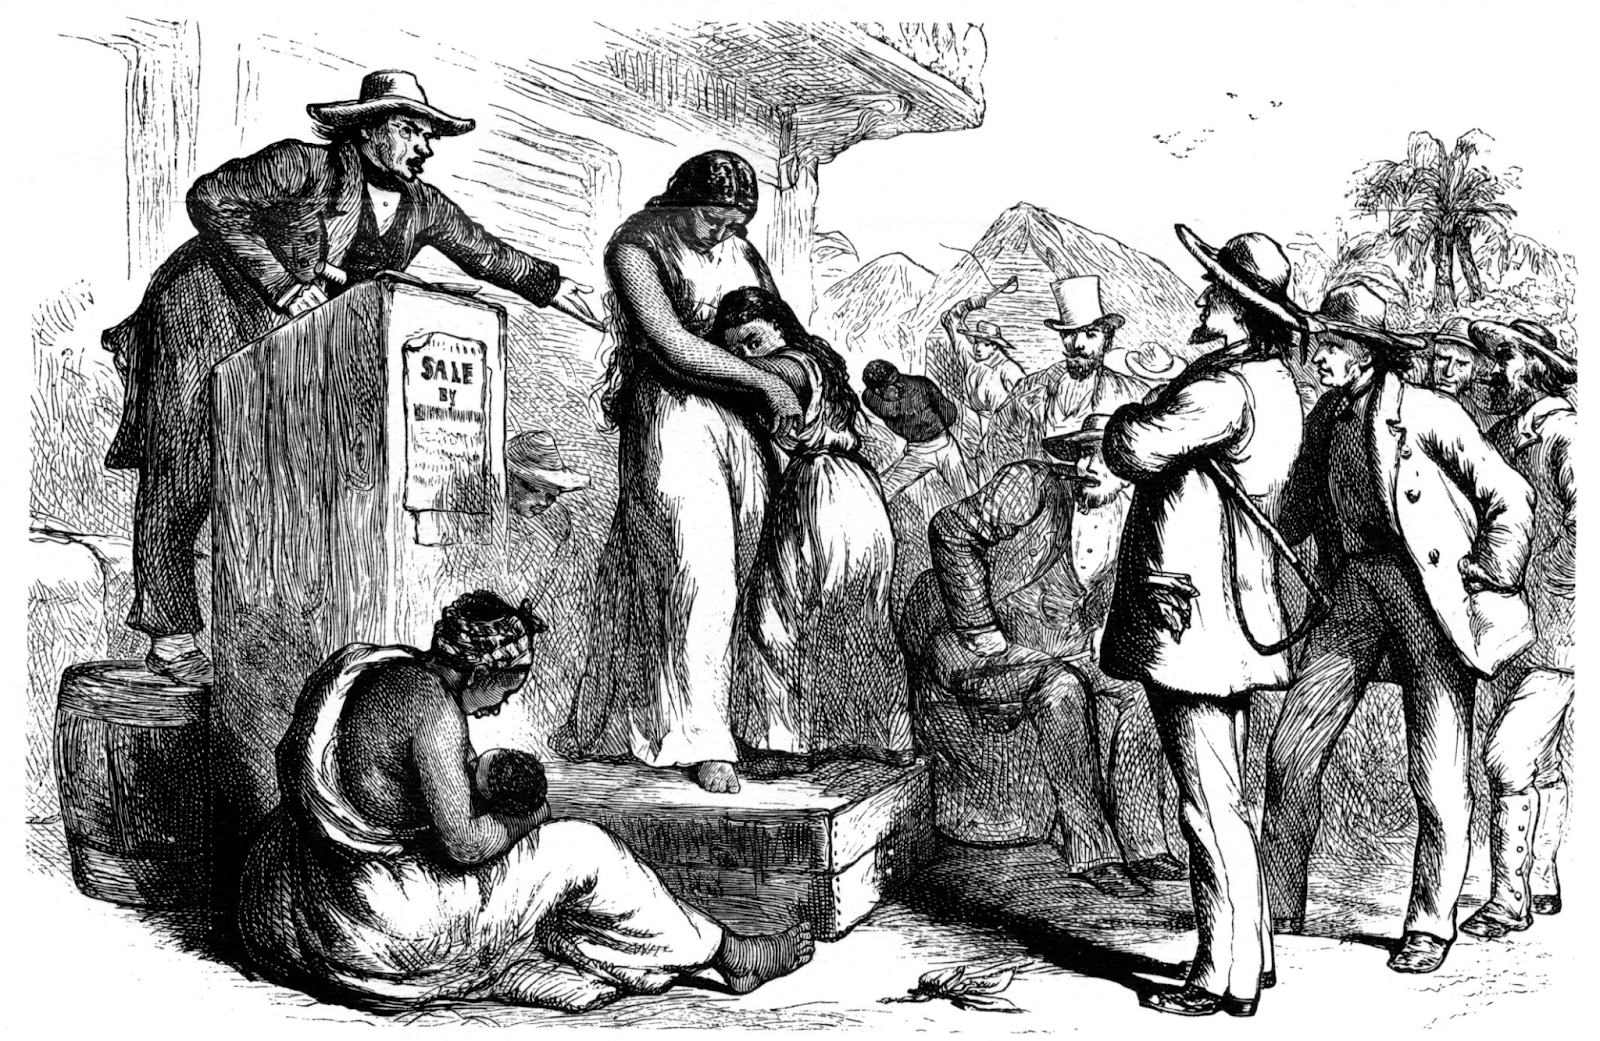 Visual representation depicting the historical reality of slavery in America. This image captures the harsh and systemic nature of slavery, highlighting the need for remembrance and understanding of this dark chapter in American history.